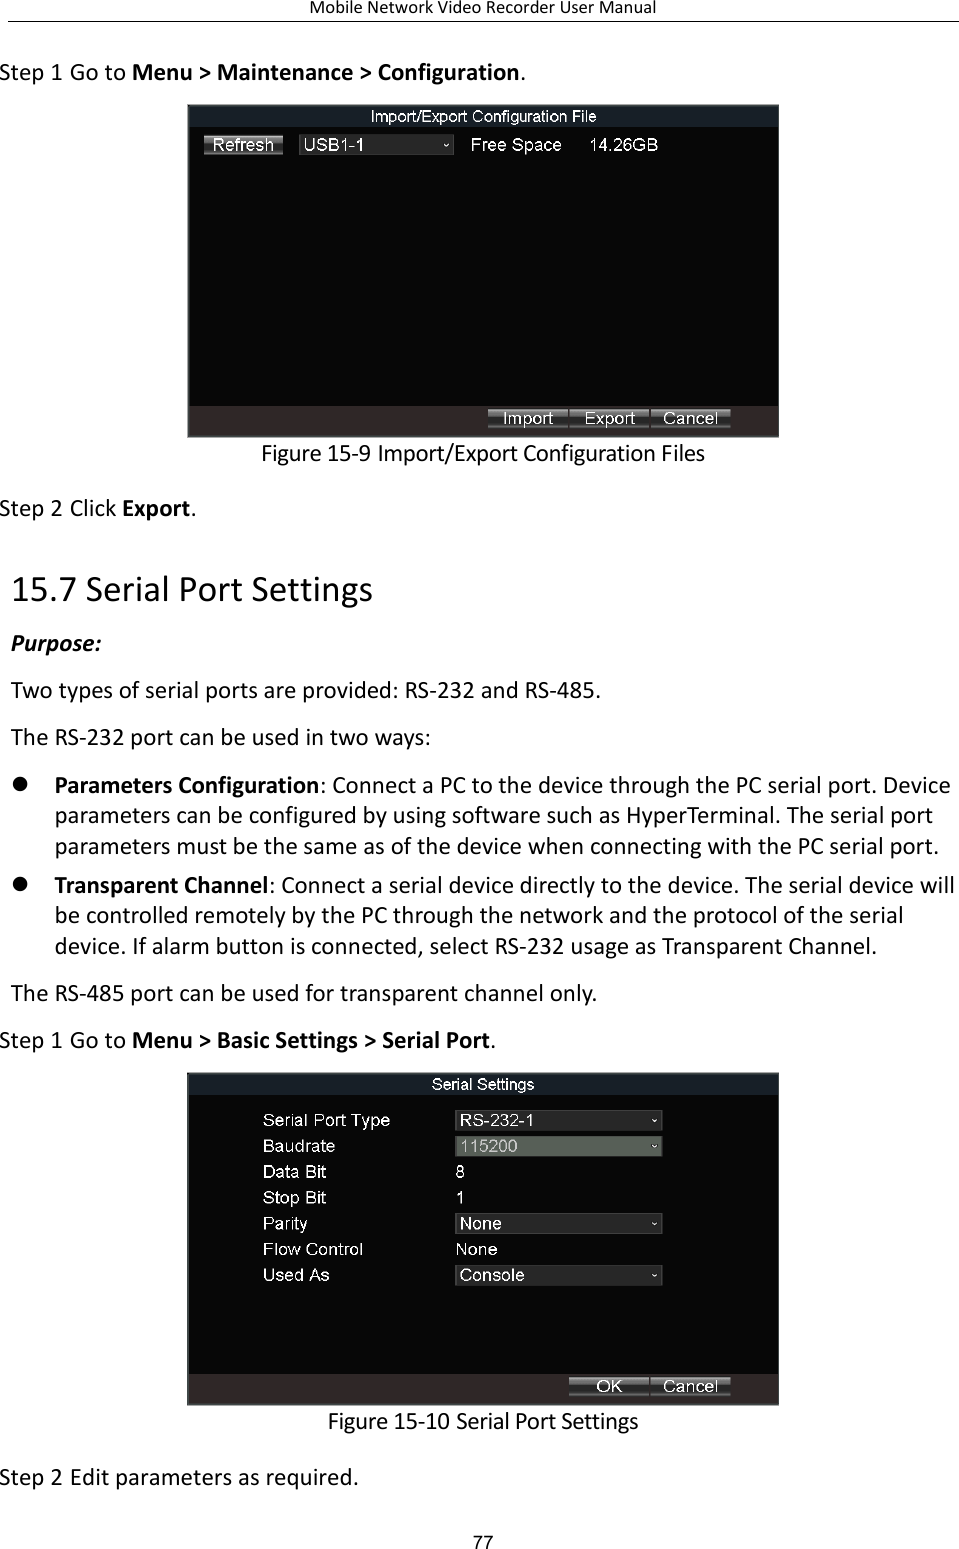 Mobile Network Video Recorder User Manual 77 Step 1 Go to Menu &gt; Maintenance &gt; Configuration.  Figure 15-9 Import/Export Configuration Files Step 2 Click Export. 15.7 Serial Port Settings Purpose:   Two types of serial ports are provided: RS-232 and RS-485. The RS-232 port can be used in two ways:  Parameters Configuration: Connect a PC to the device through the PC serial port. Device parameters can be configured by using software such as HyperTerminal. The serial port parameters must be the same as of the device when connecting with the PC serial port.  Transparent Channel: Connect a serial device directly to the device. The serial device will be controlled remotely by the PC through the network and the protocol of the serial device. If alarm button is connected, select RS-232 usage as Transparent Channel. The RS-485 port can be used for transparent channel only. Step 1 Go to Menu &gt; Basic Settings &gt; Serial Port.  Figure 15-10 Serial Port Settings Step 2 Edit parameters as required. 